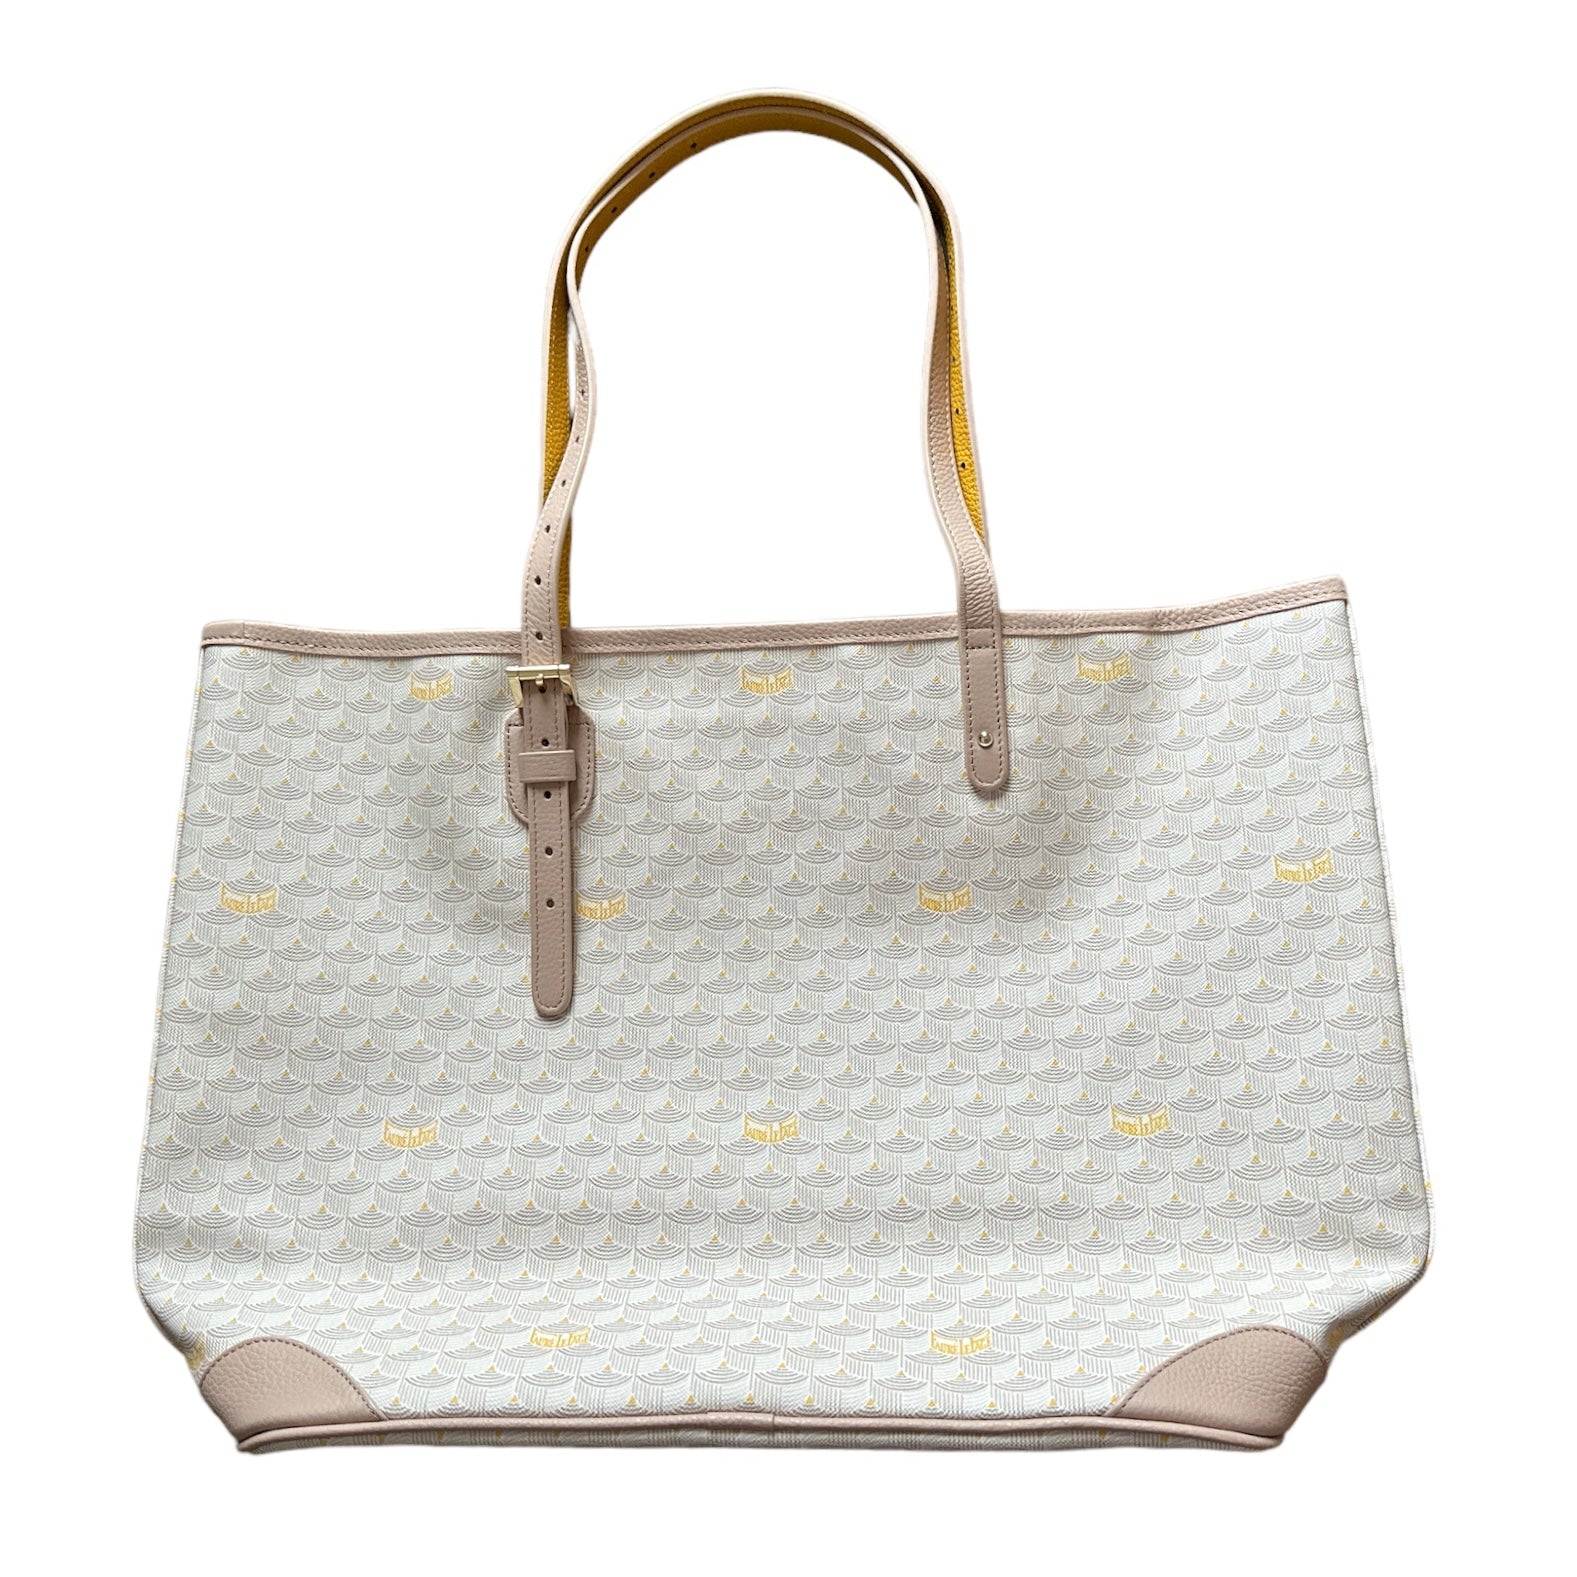 Faure Le Page Daily Battle 37 Tote Bag